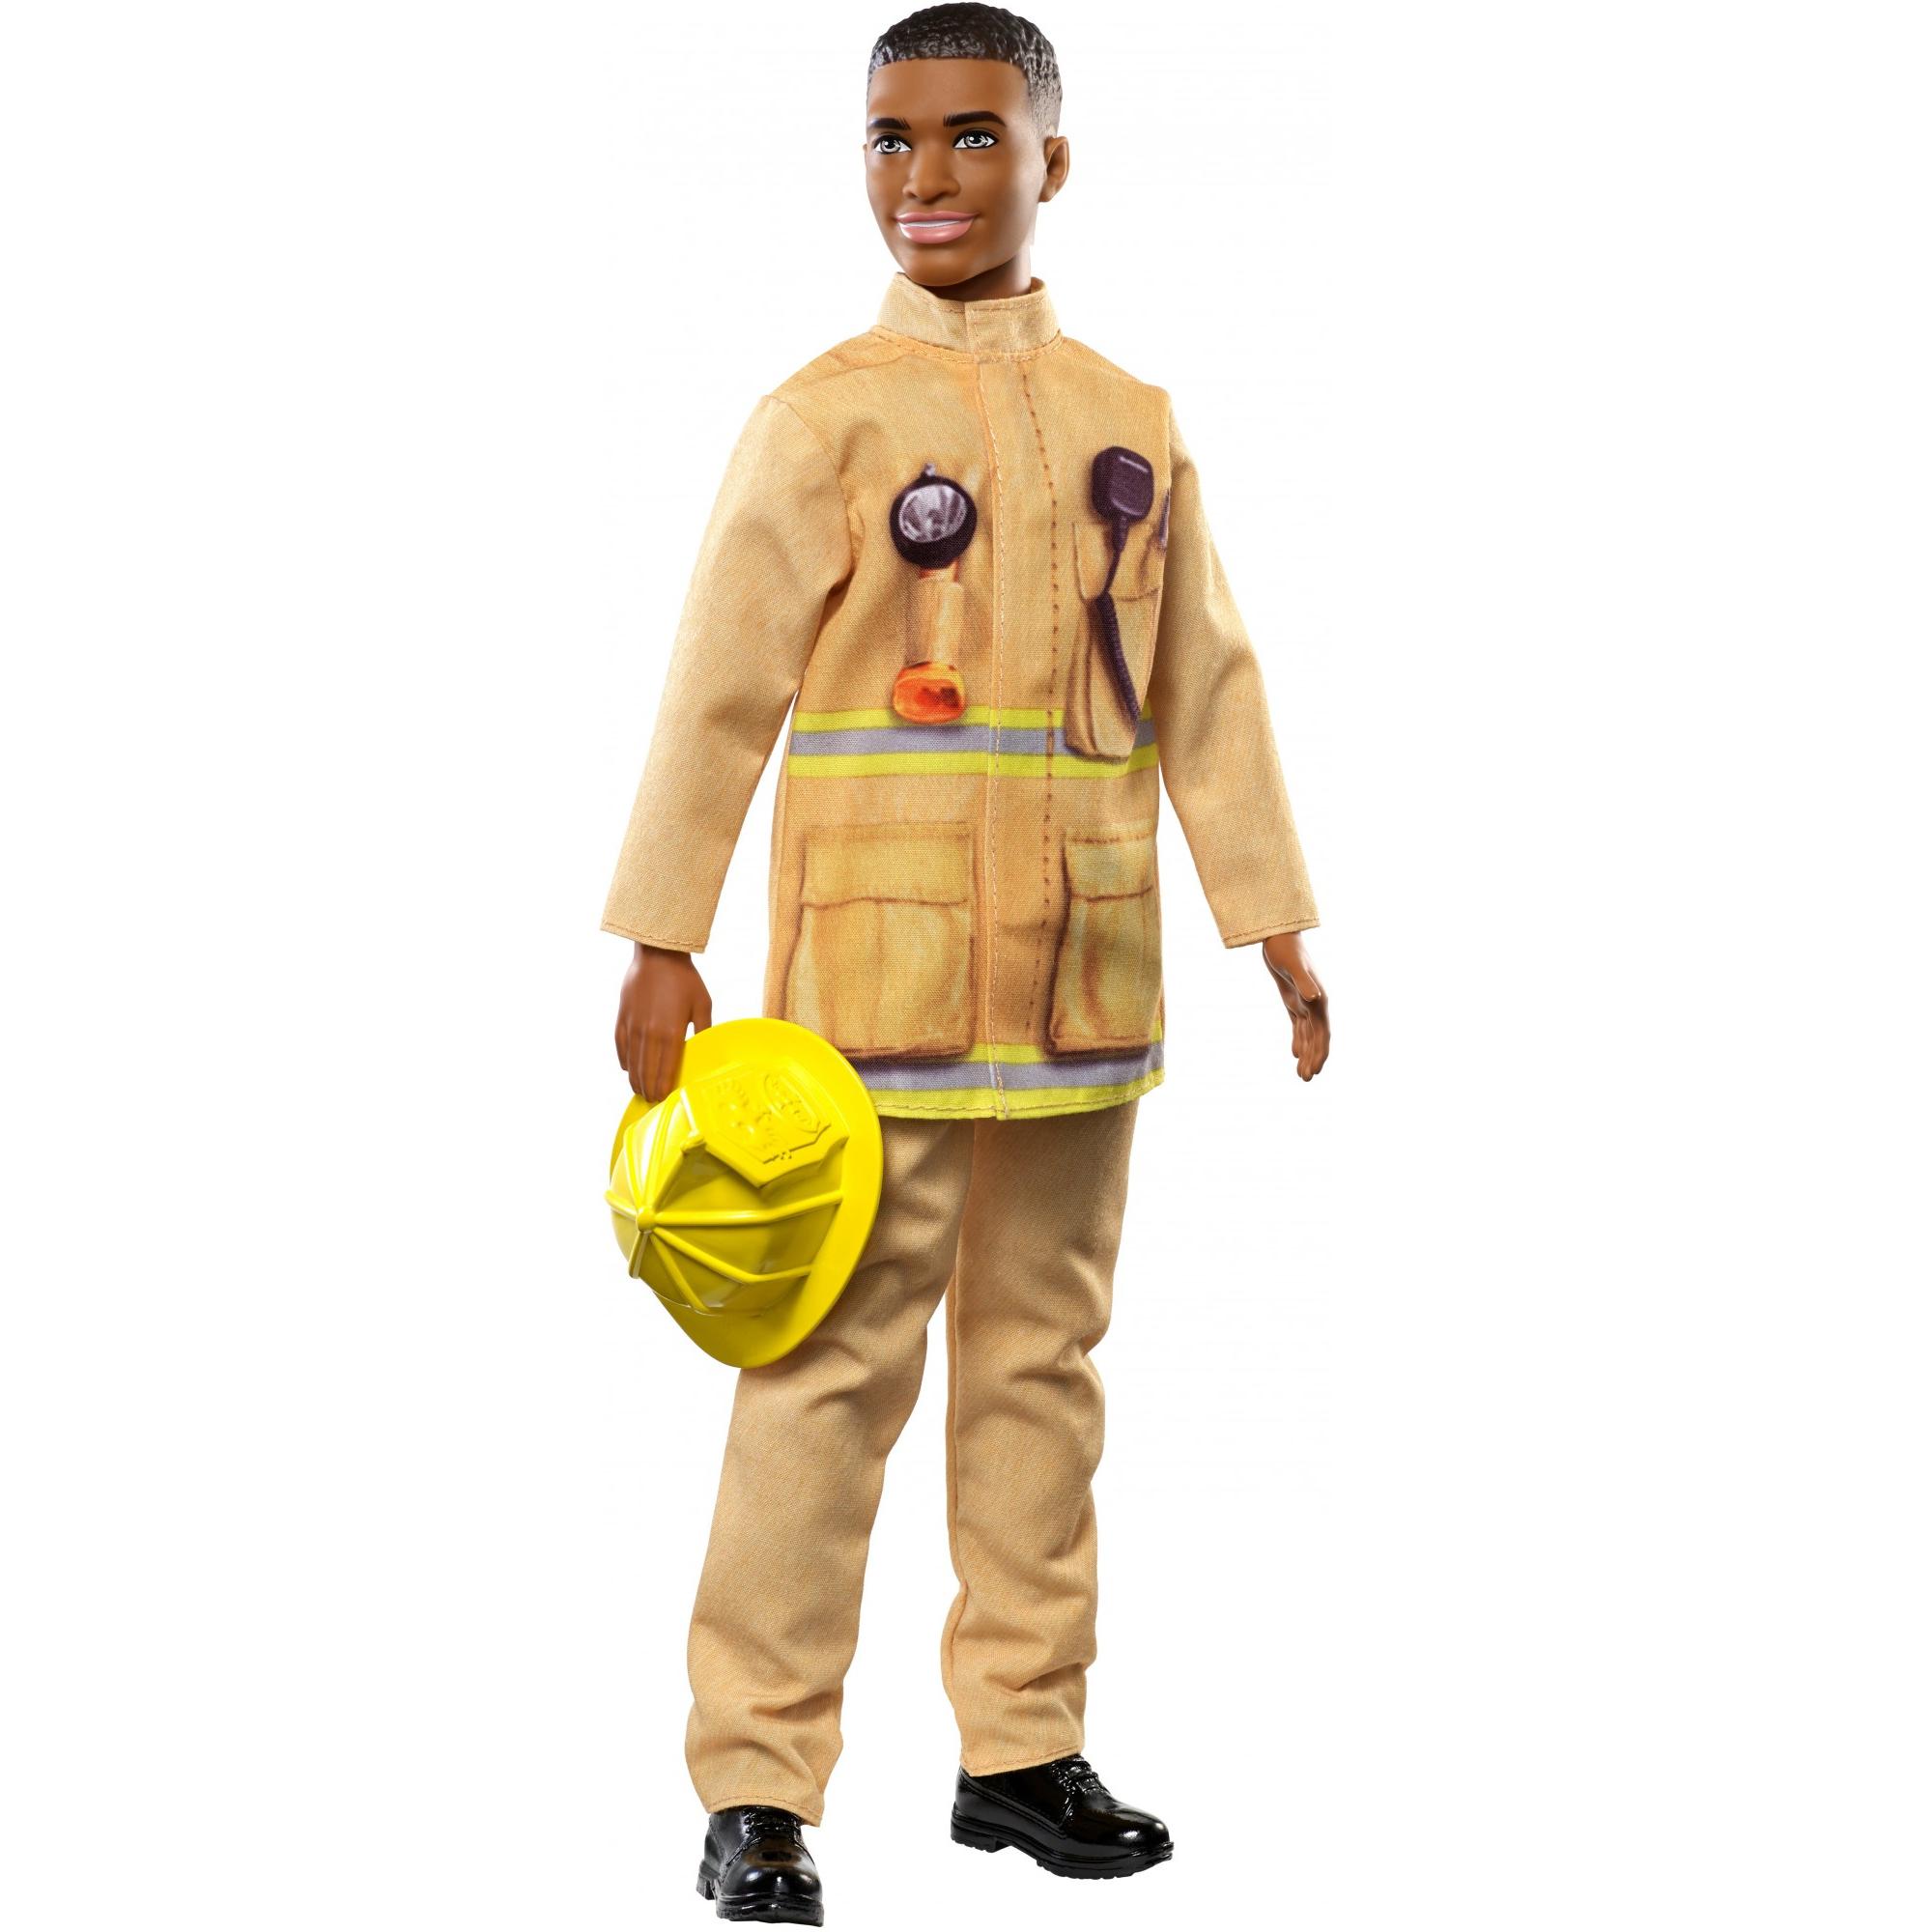 Barbie Ken Careers Firefighter Doll with Career-Themed Accessories - image 3 of 6